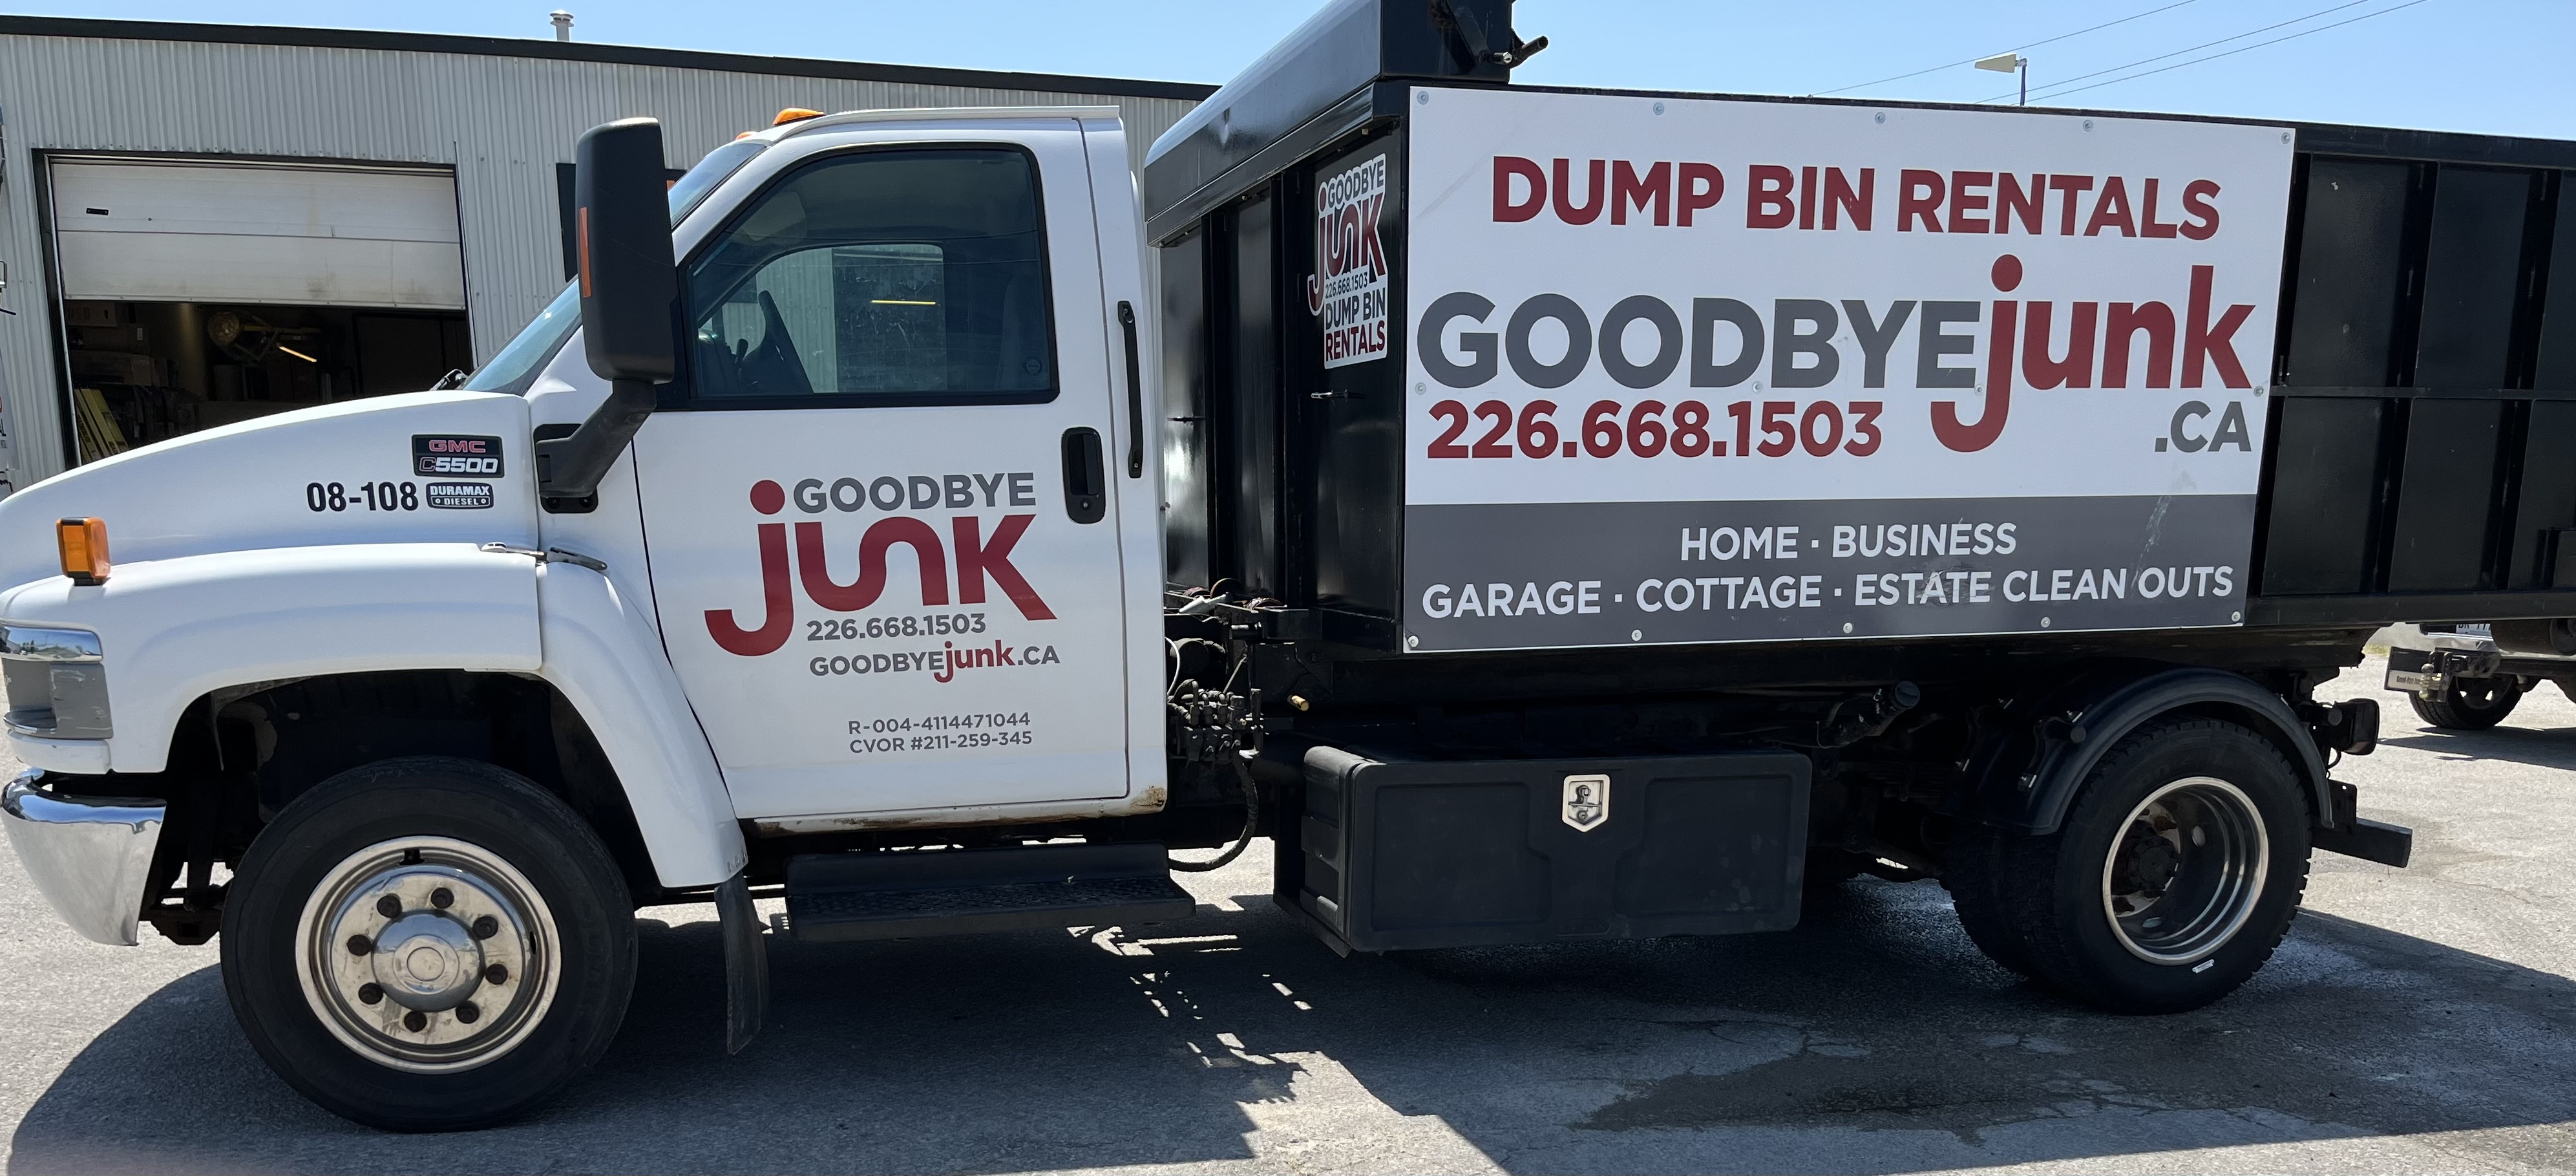 Or Junk Removal Company will get rid of Your Unwanted Items Quickly and Easily